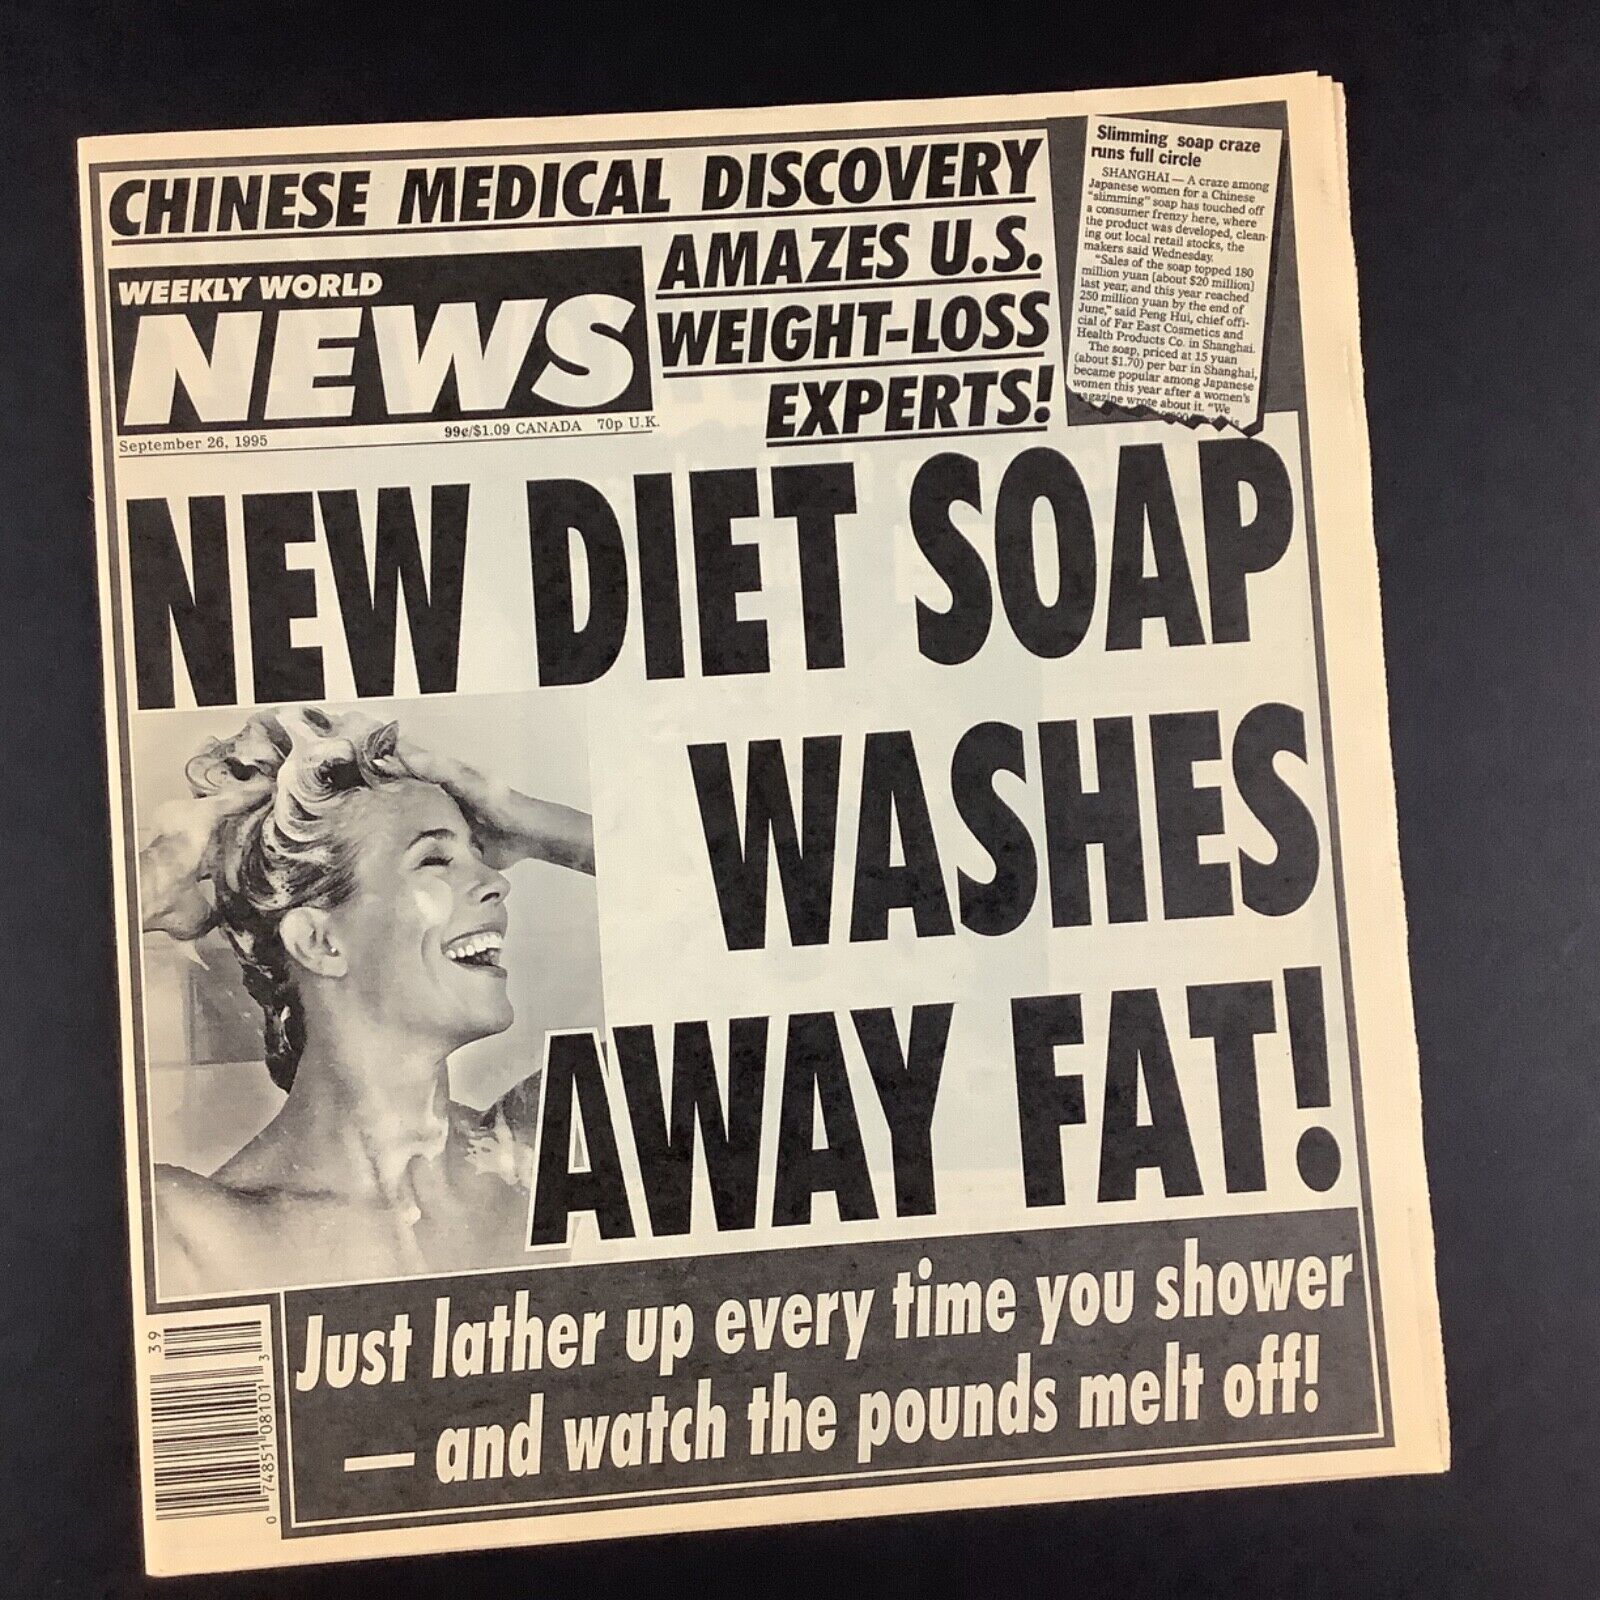 Rare 1995 WEEKLY WORLD NEWS MAG New Diet Soap Washes Away Fat Hitlers Brain